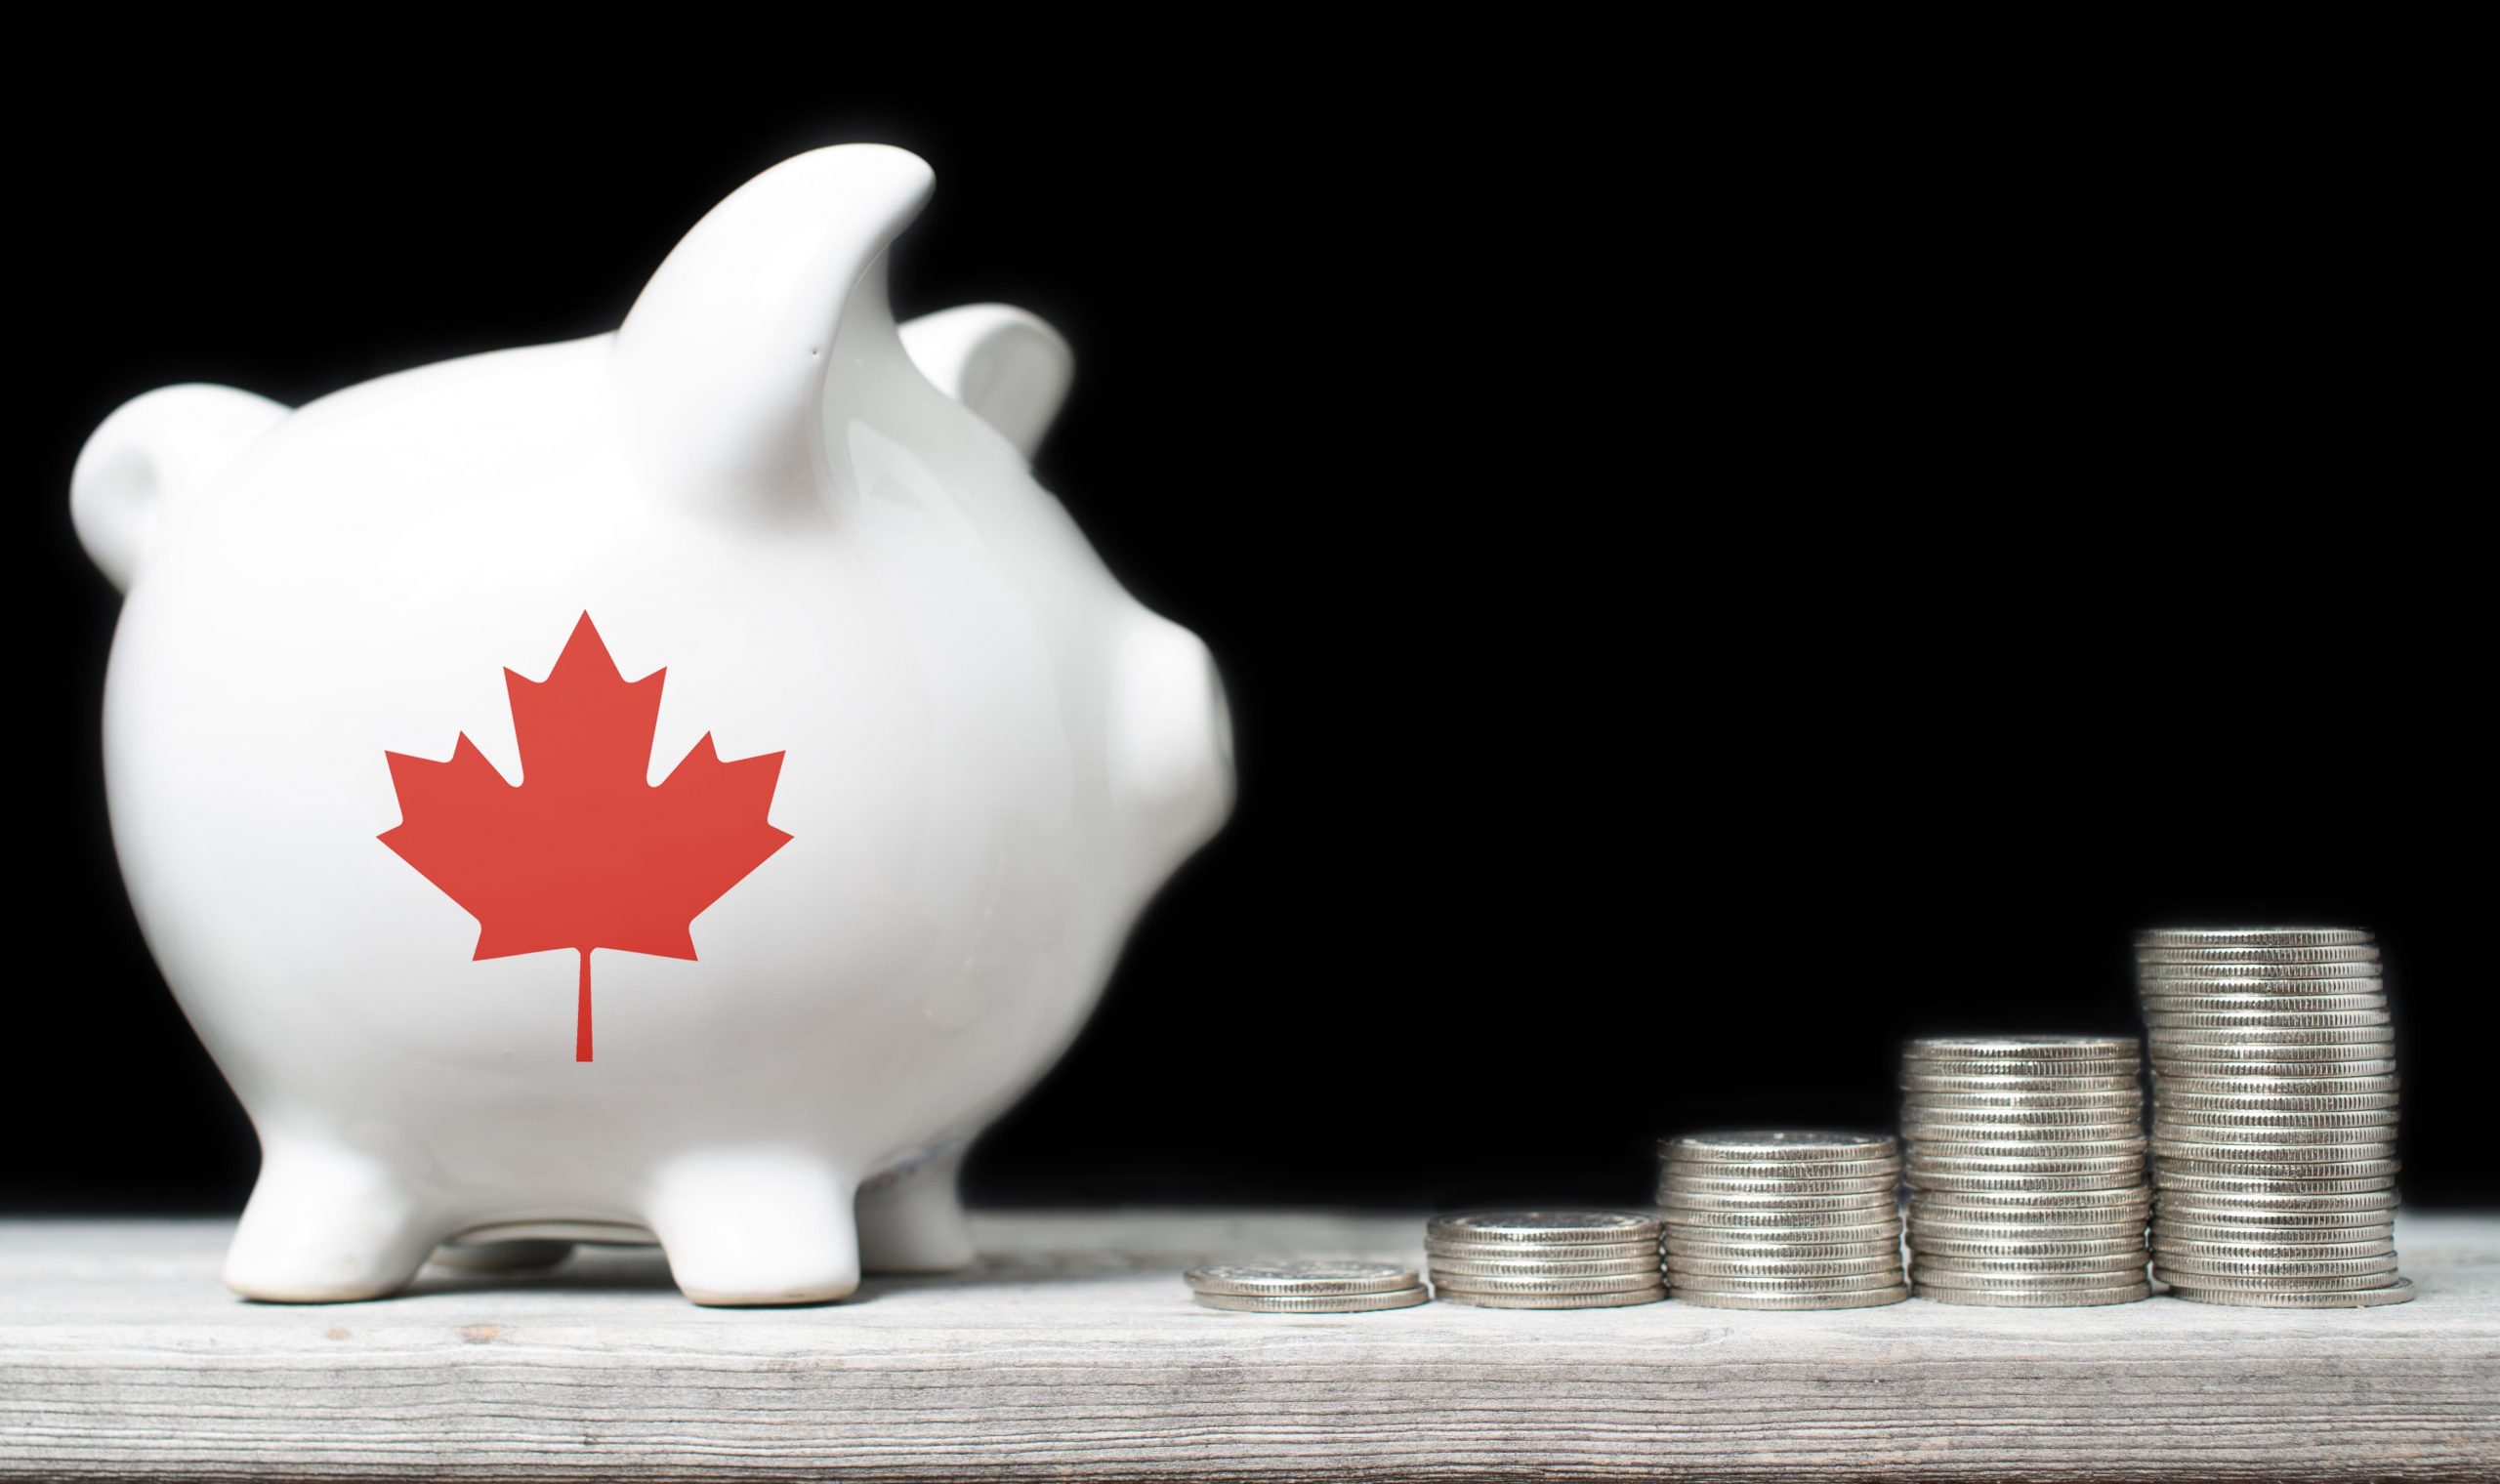 Financial Independence in Canada